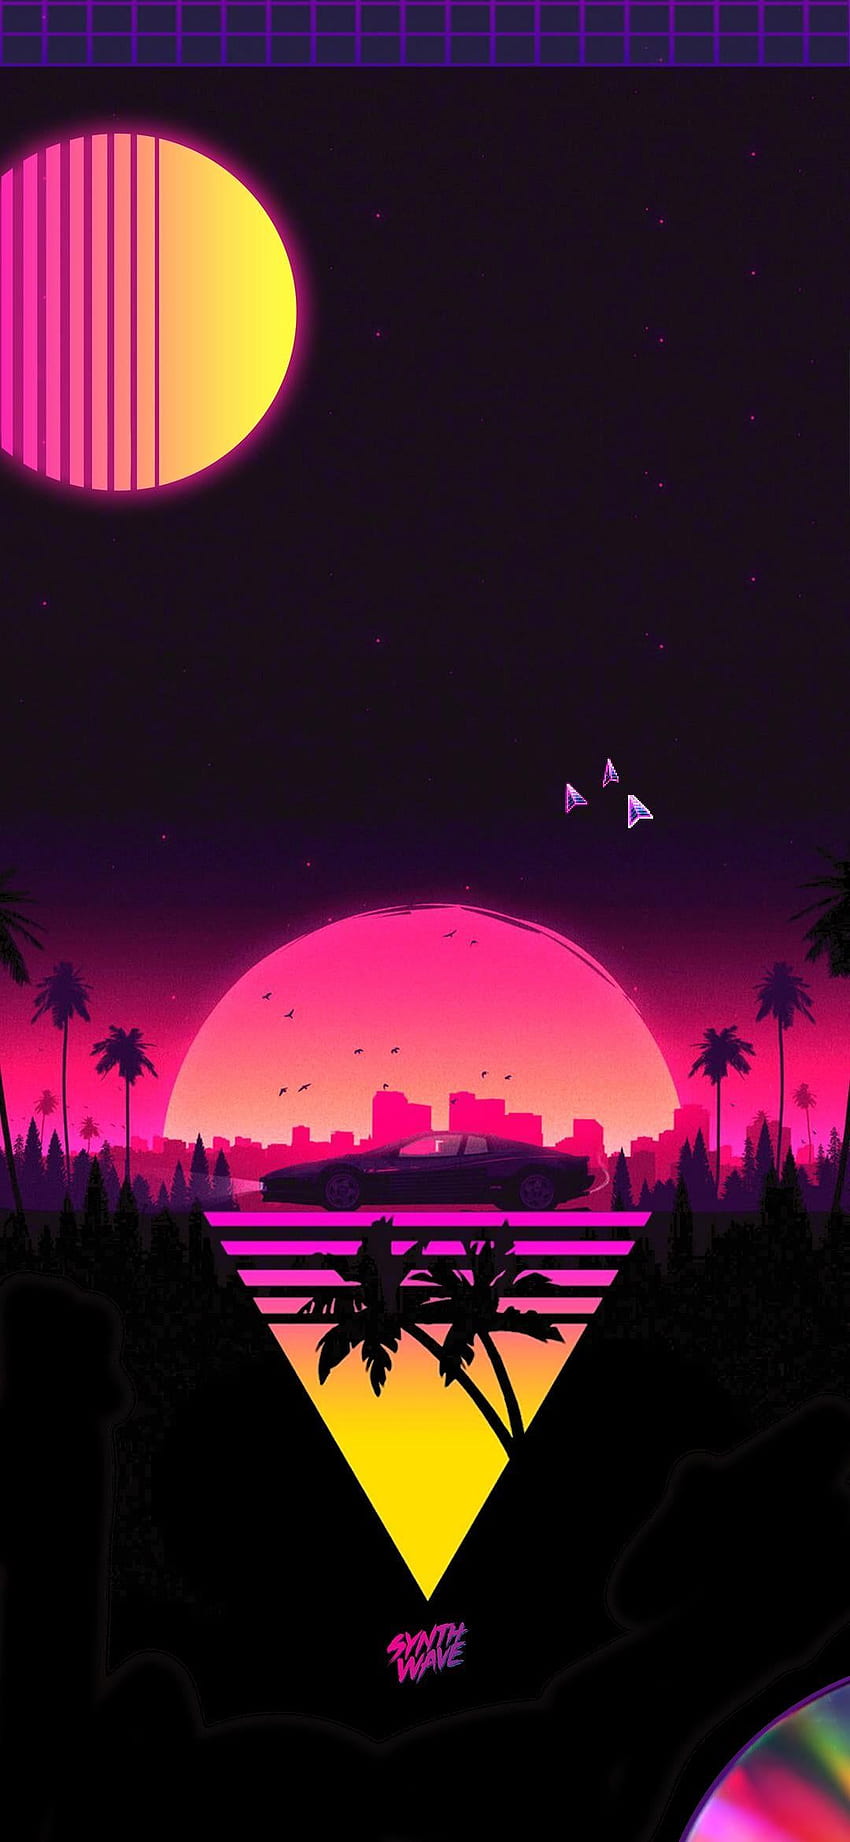 Synth Wave Mobile I designed for my lockscreen, Synthwave HD phone wallpaper